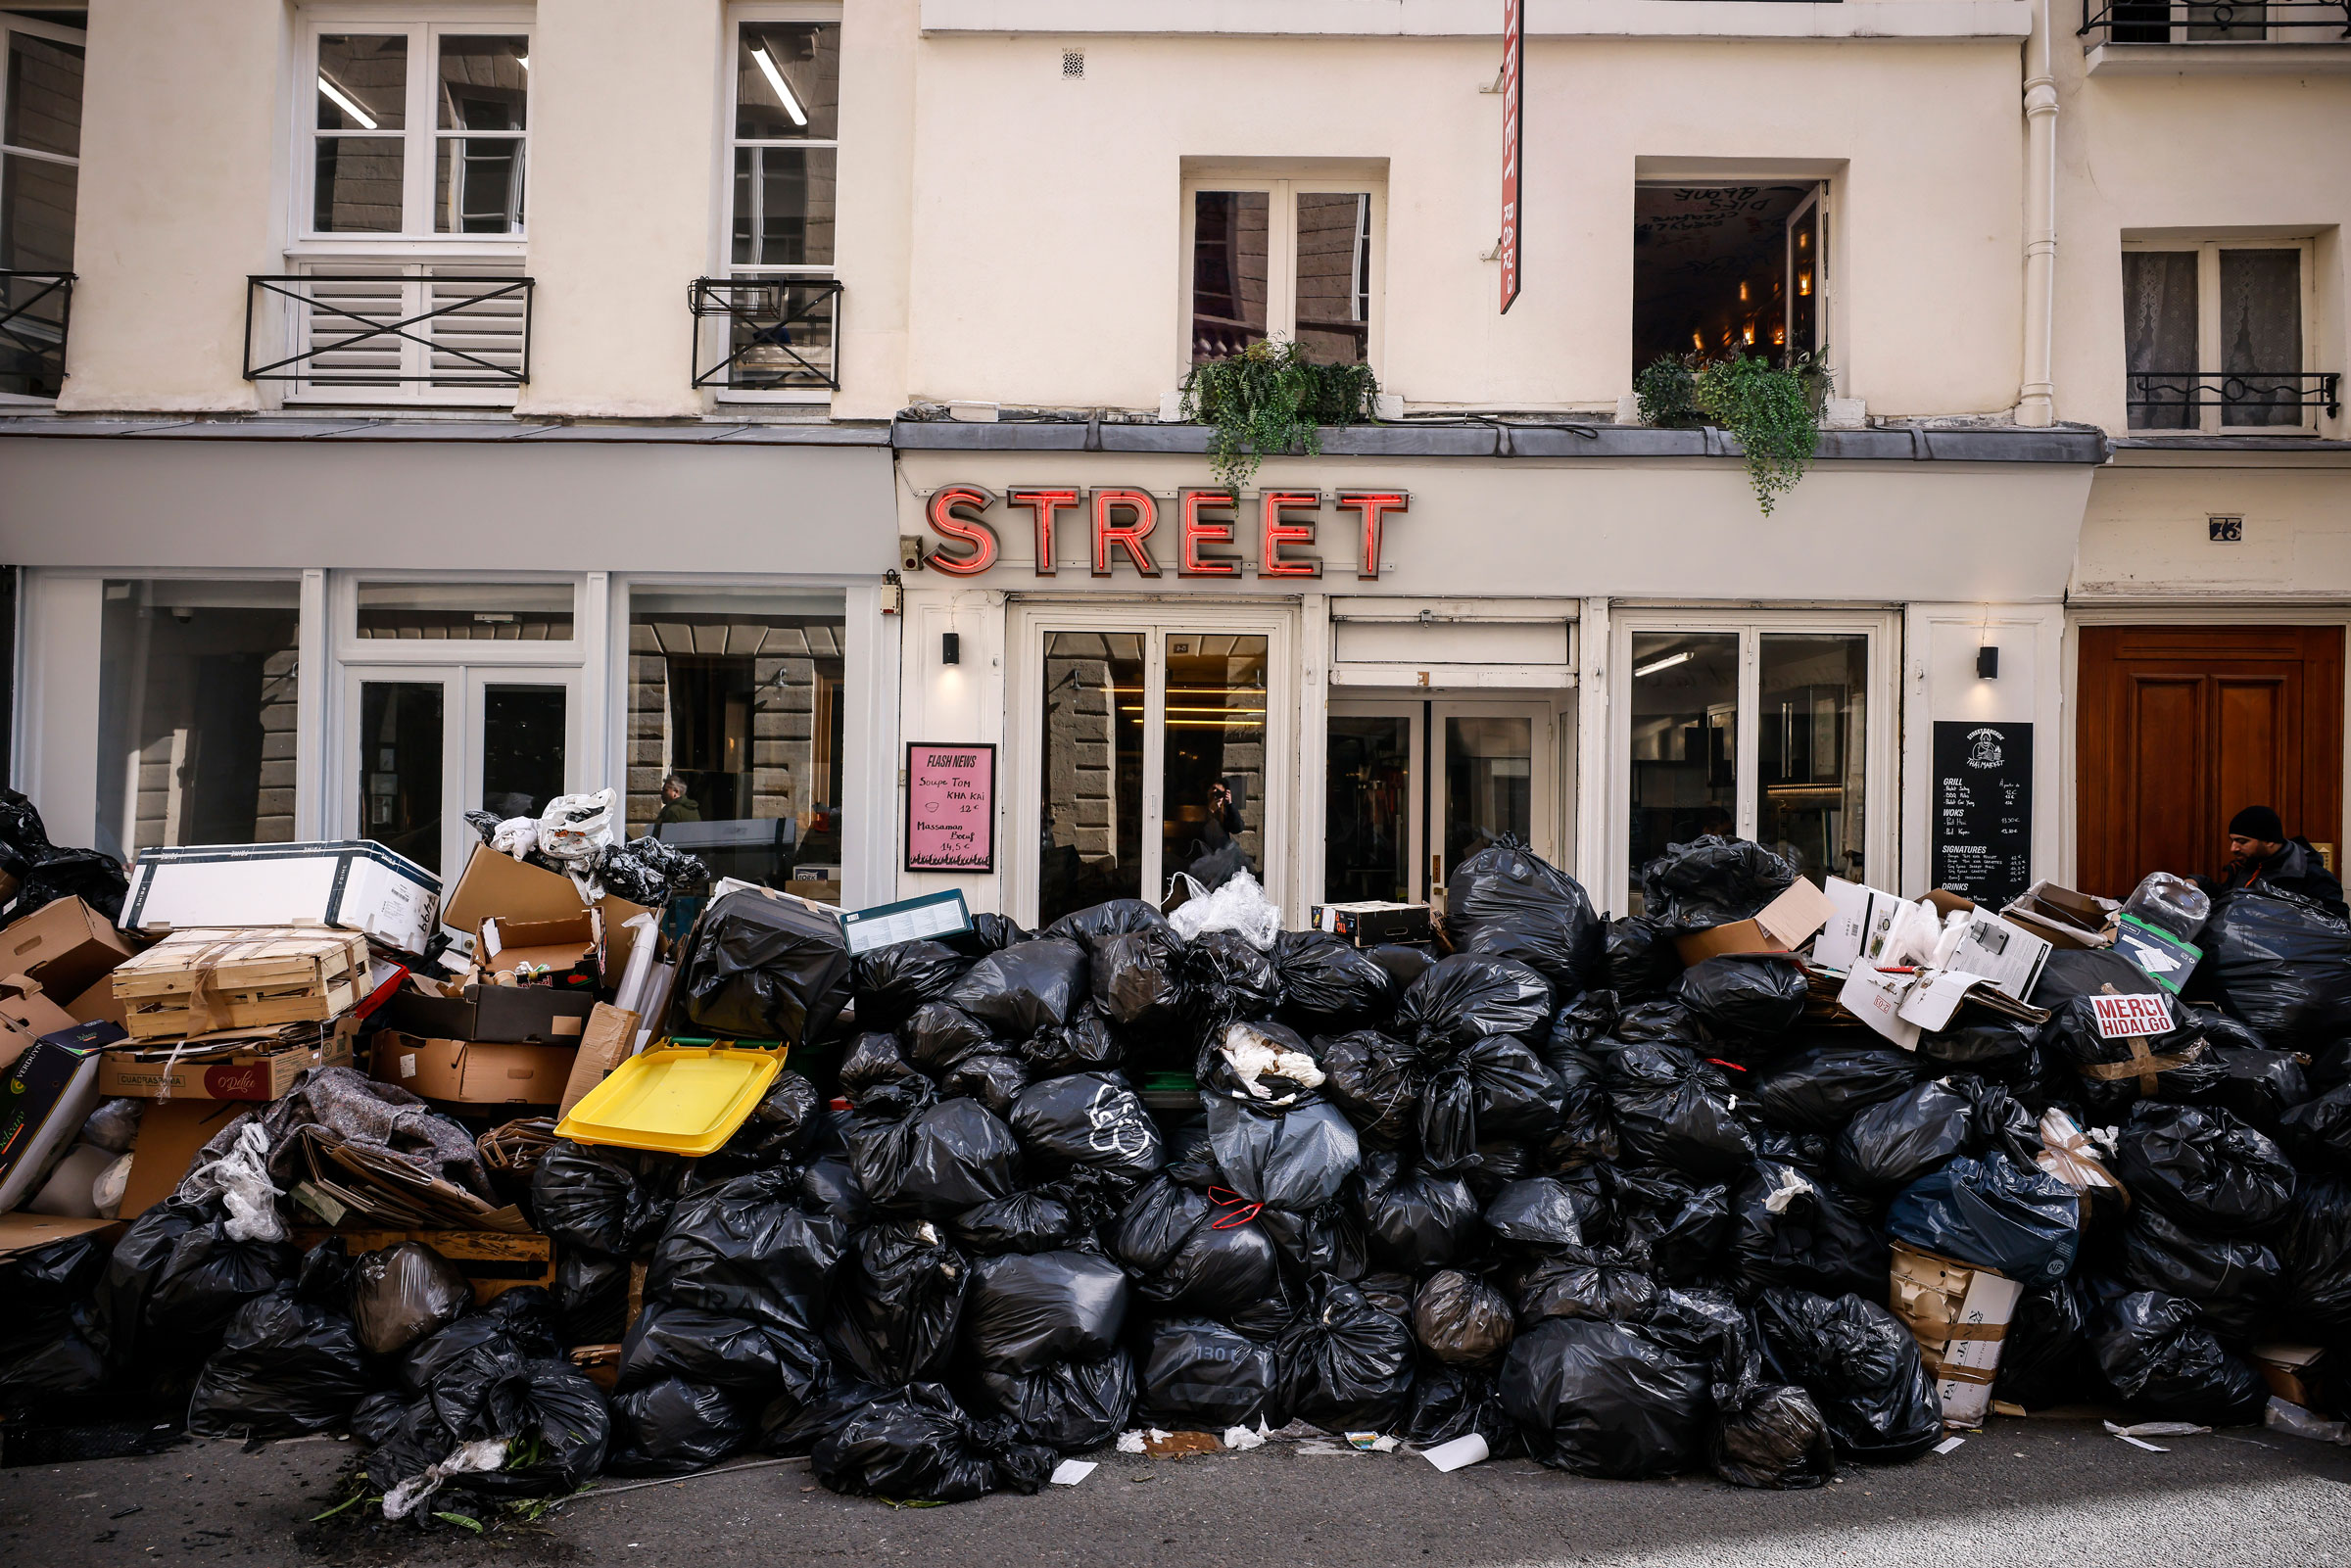 Uncollected garbage is piled up on a street in Paris during an ongoing strike by sanitation workers, on March 15, 2023.